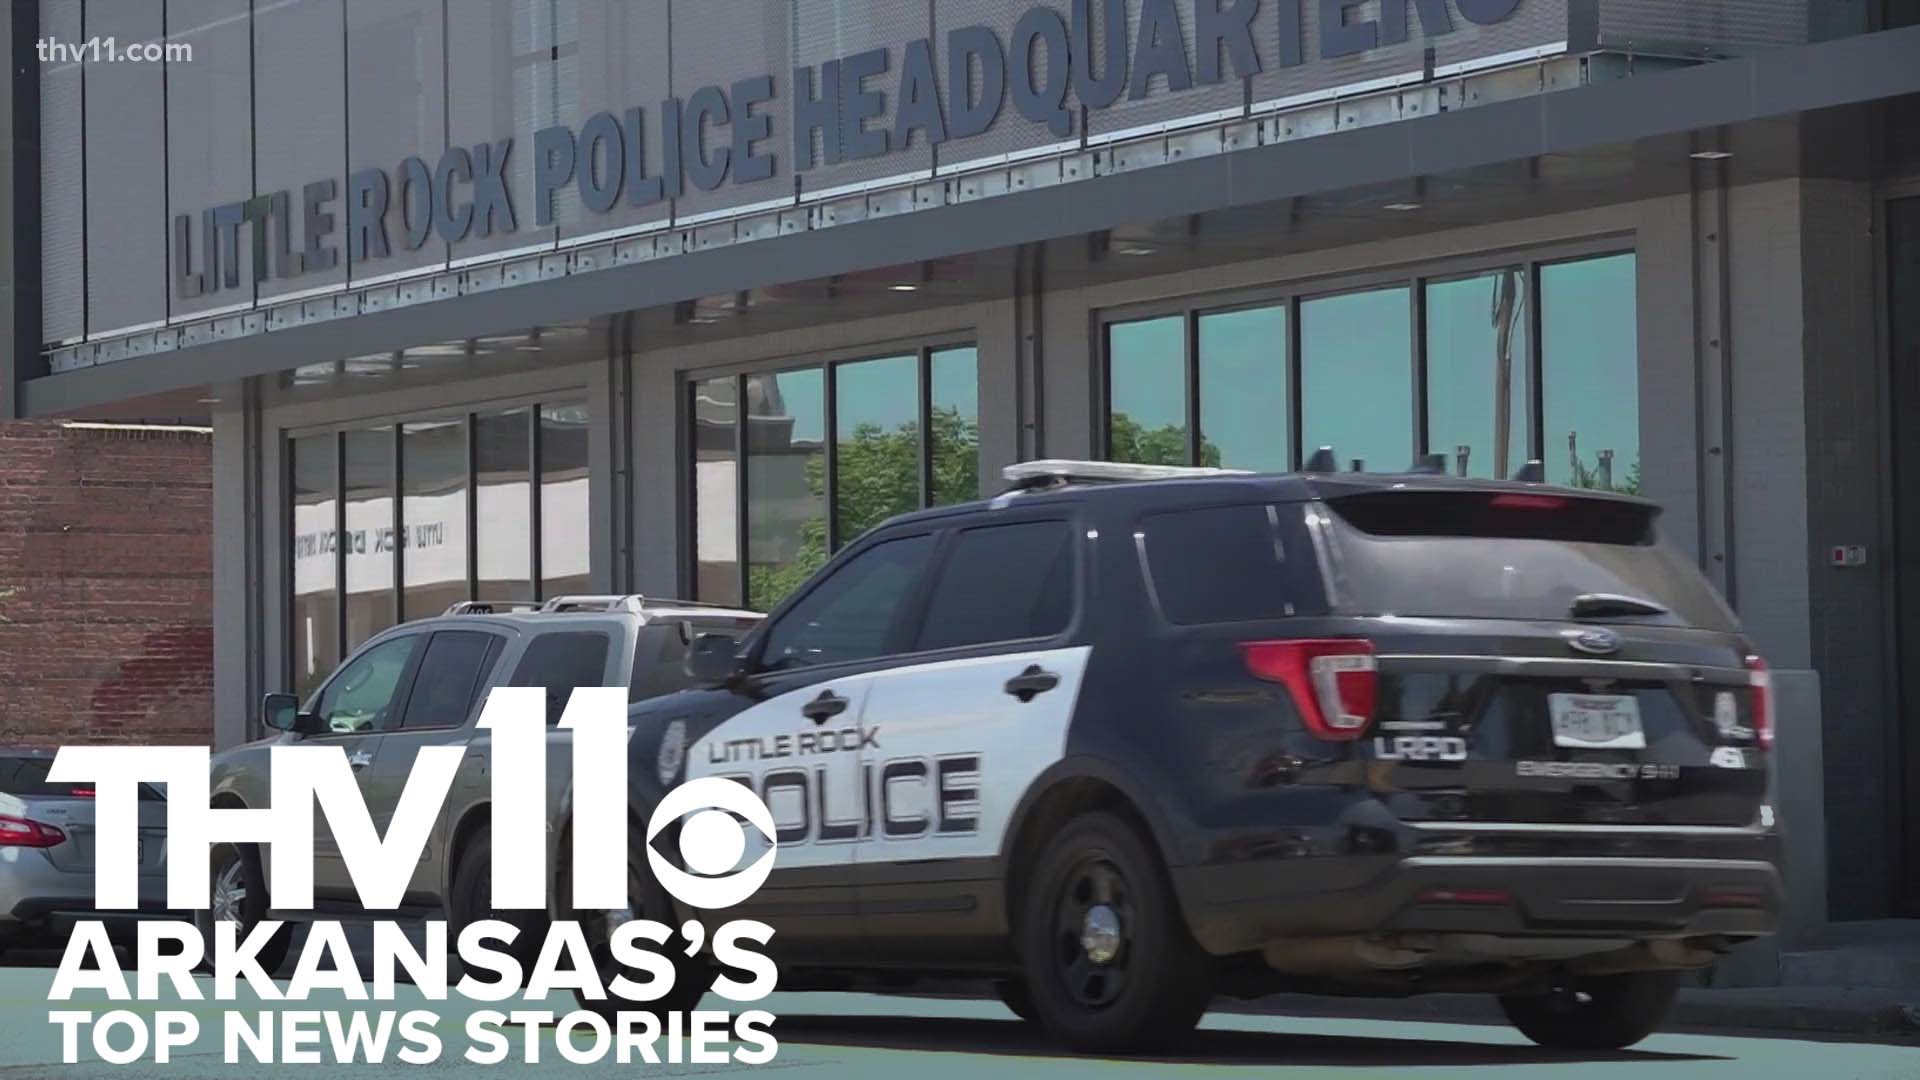 Rolly Hoyt presents Arkansas's top news stories for May 4, 2023, including how Little Rock police investigate car crashes and ongoing tornado debris cleanup.